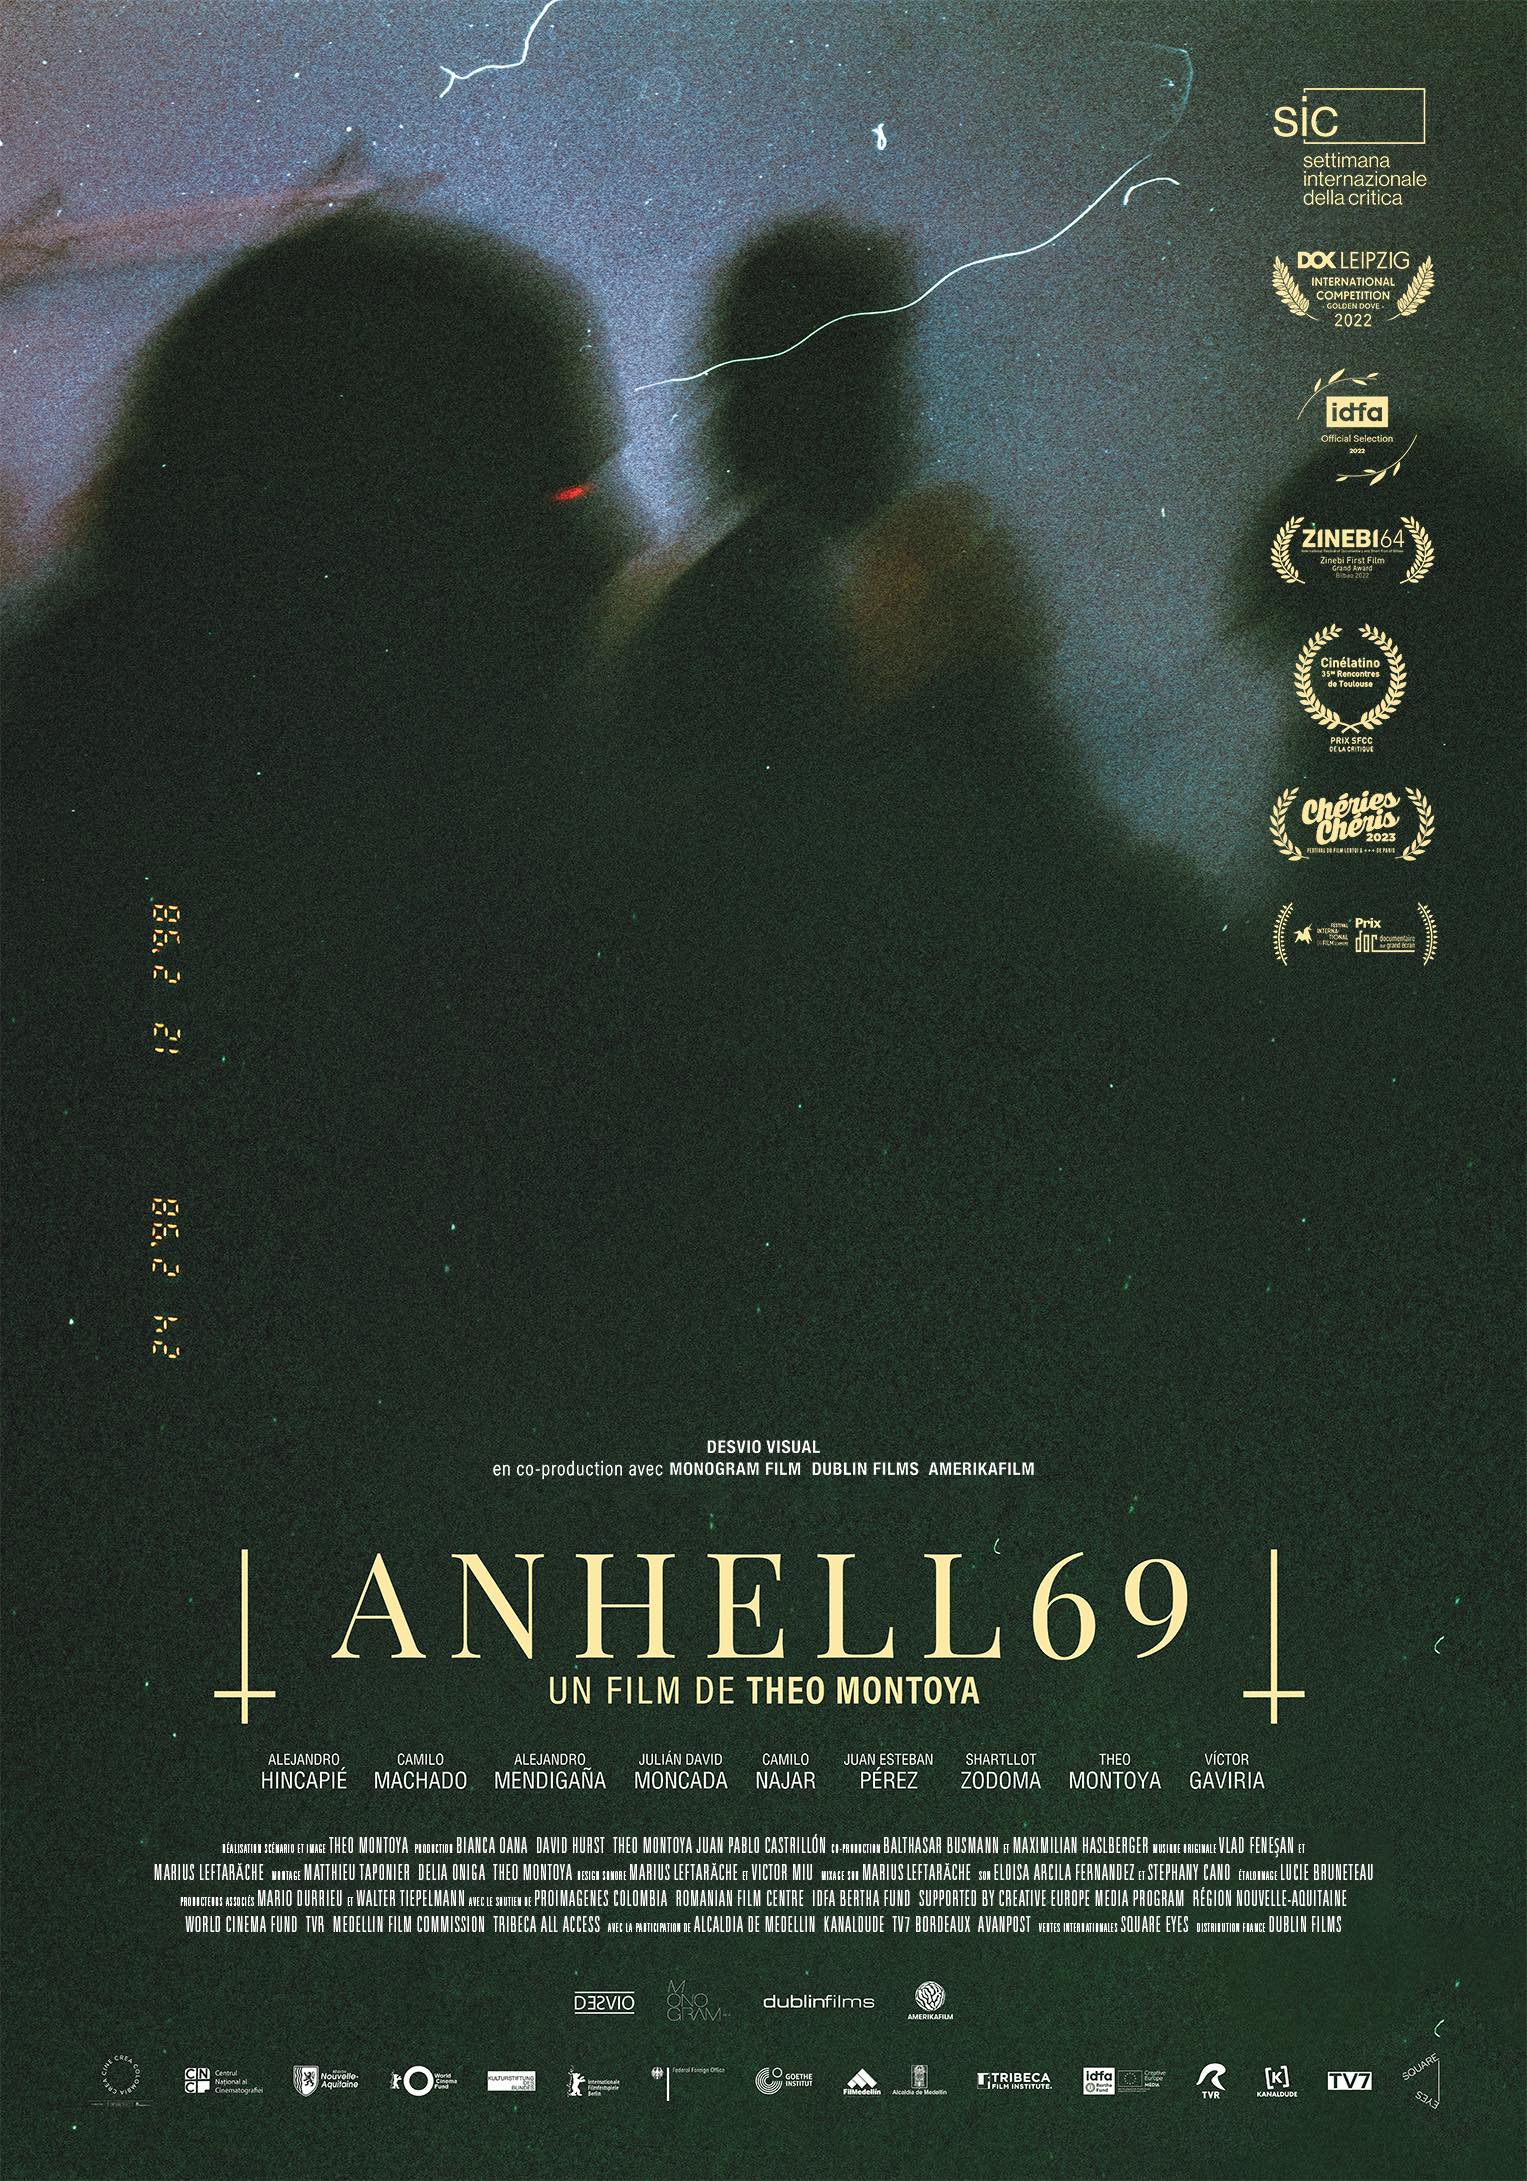 ANHELL69